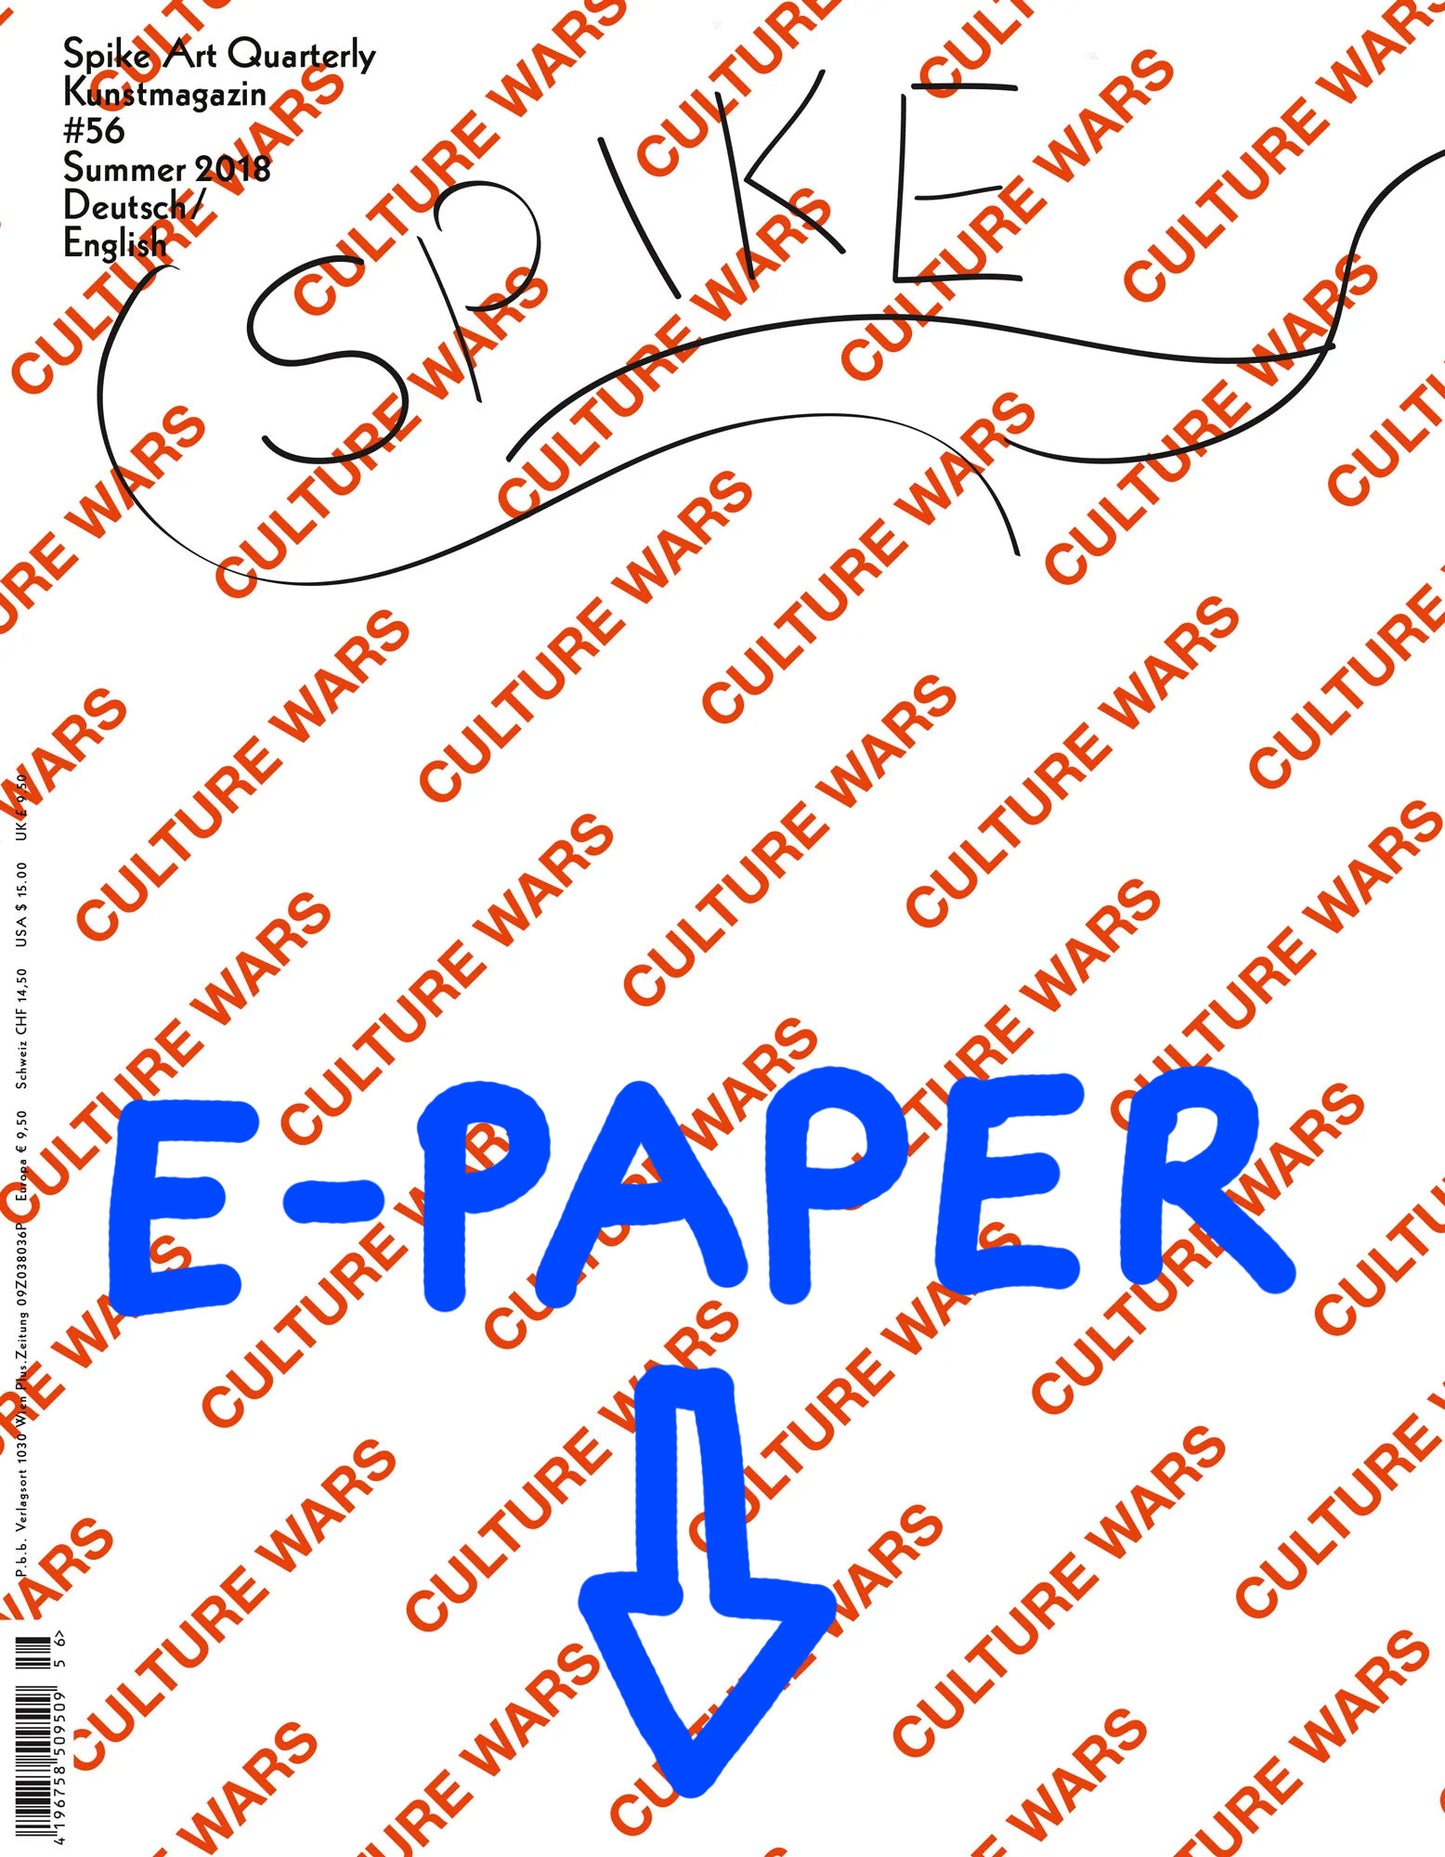 Spike ePaper (Issue 56): Culture Wars